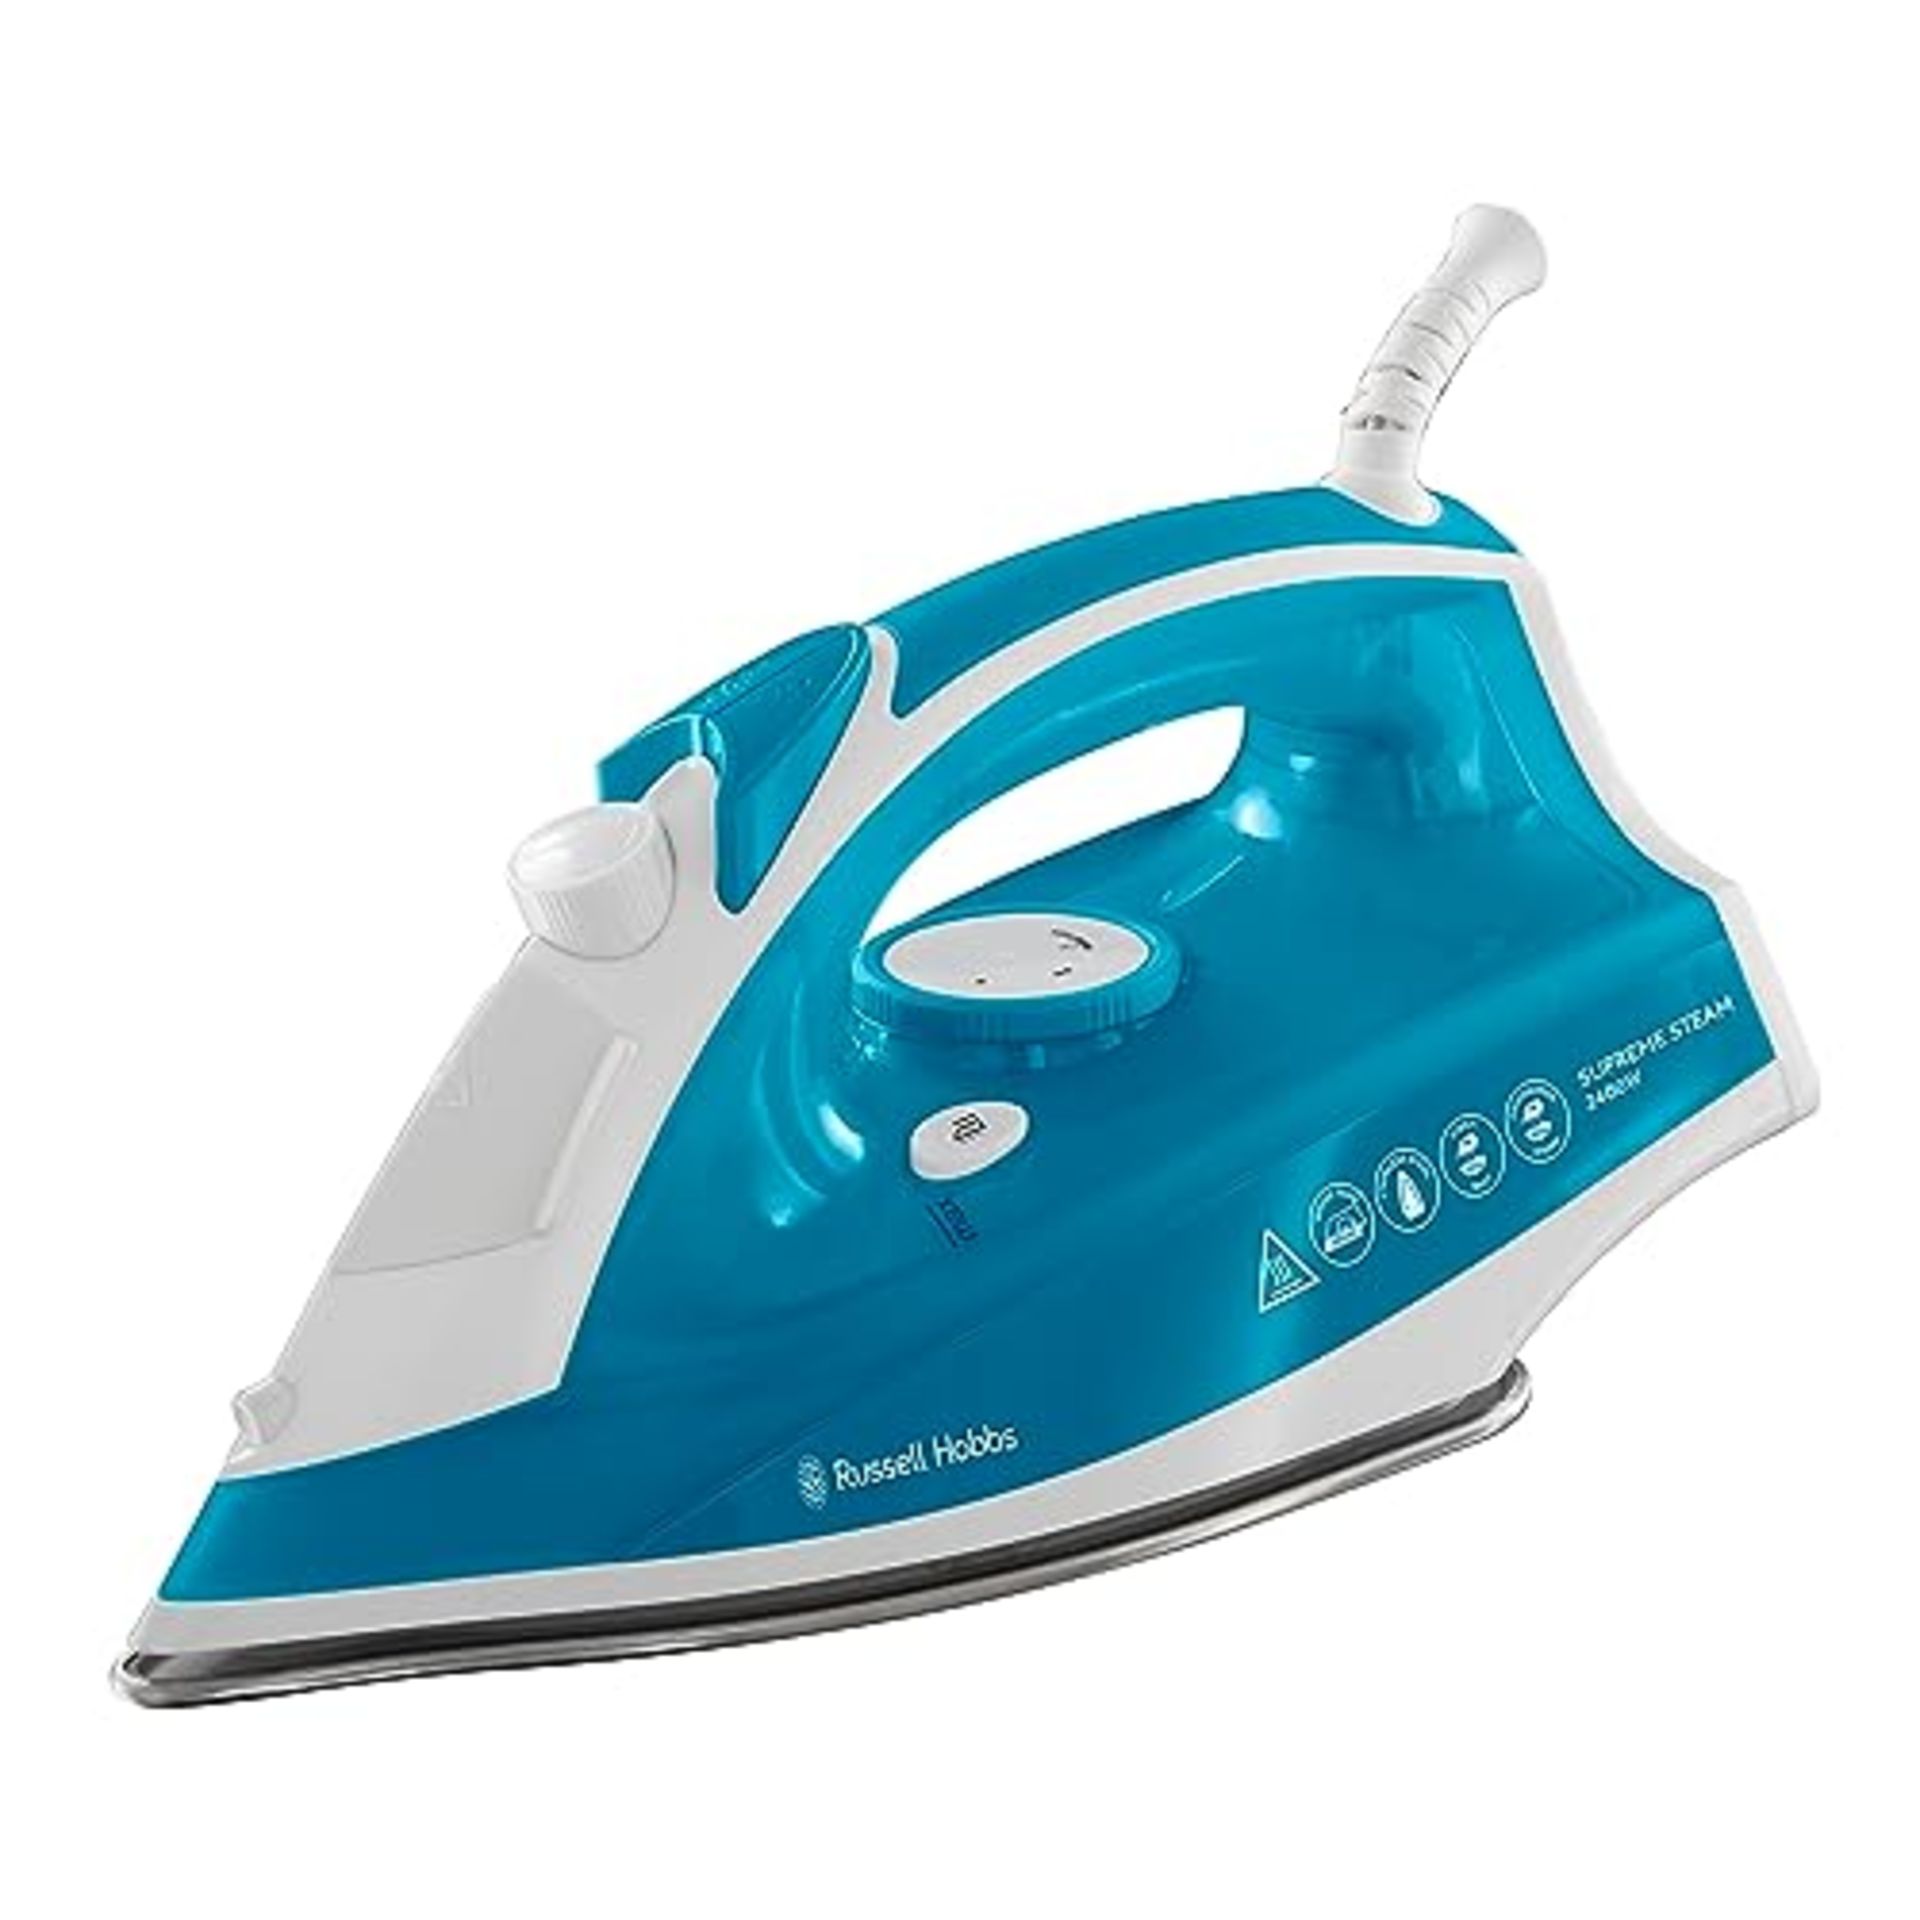 Russell Hobbs Supreme Steam Traditional Iron 23061, 2400 W, White/Blue - Image 2 of 2